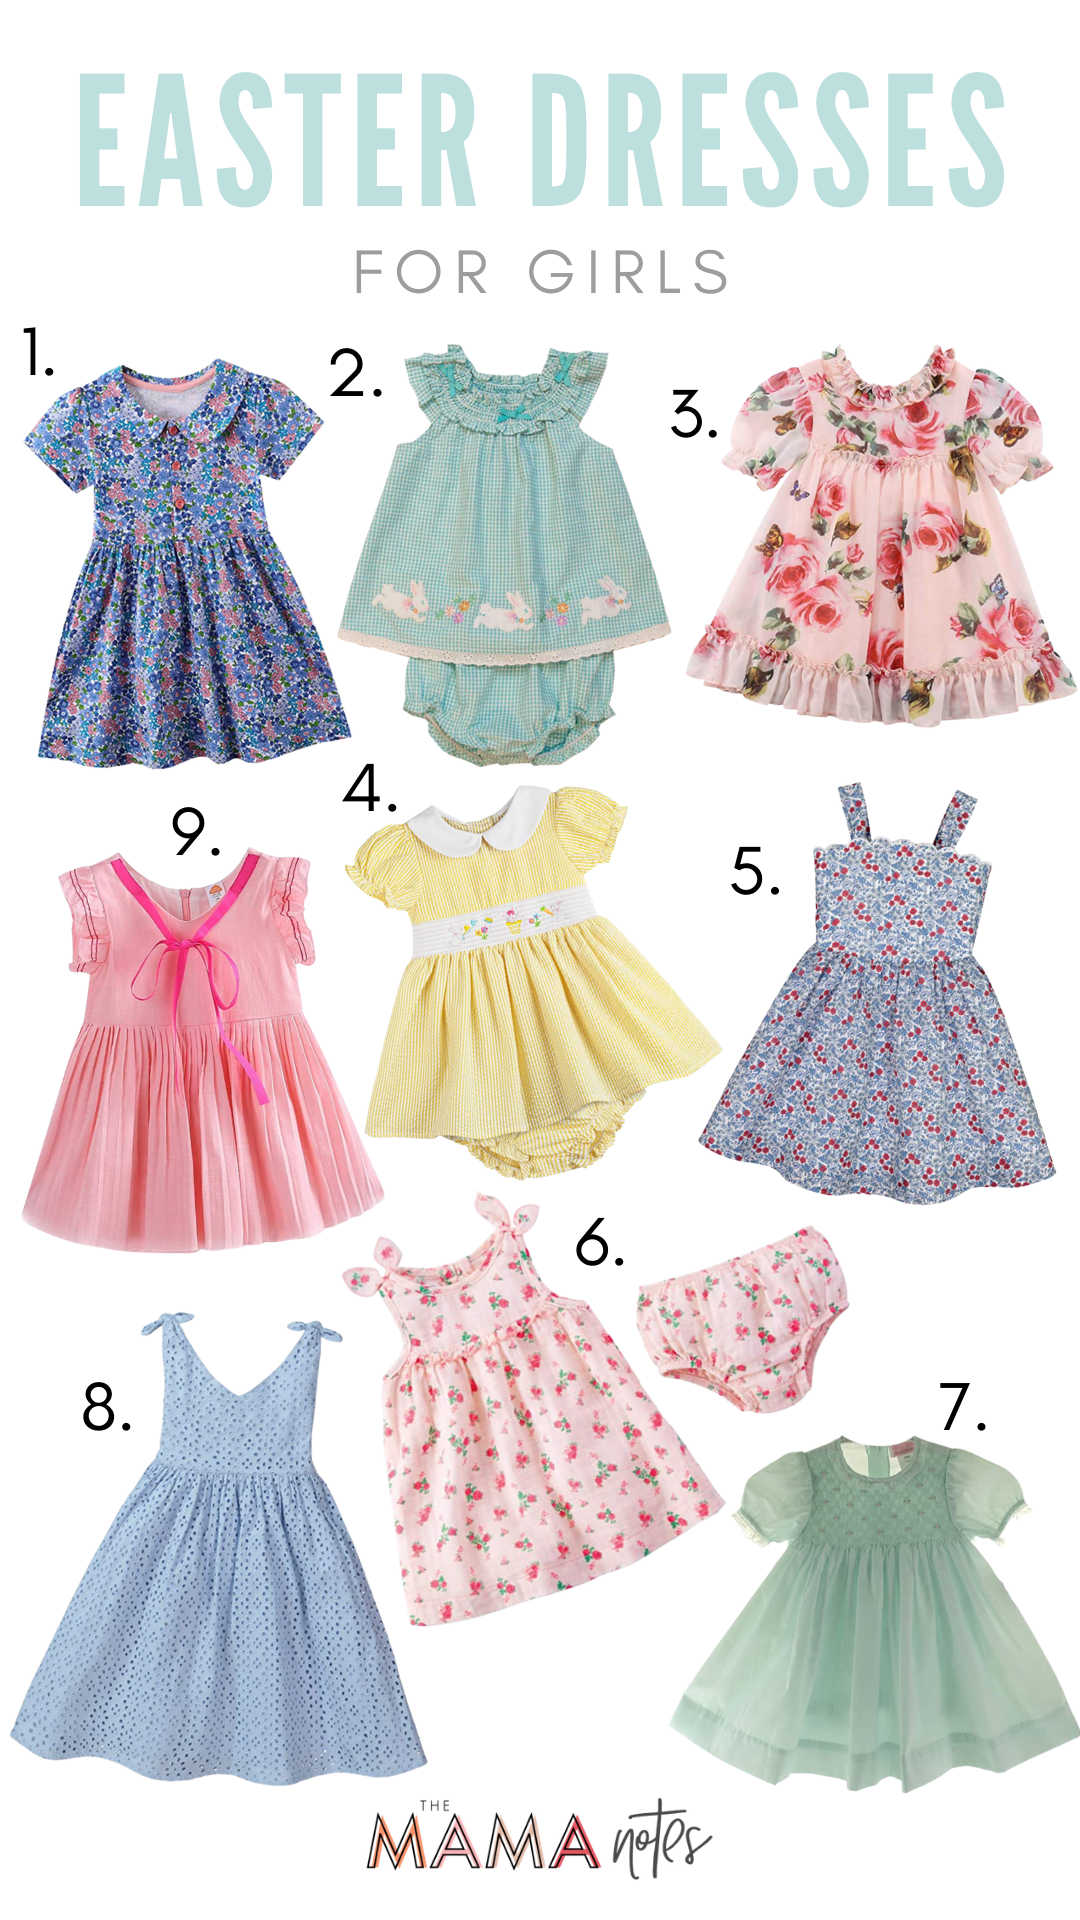 https://themamanotes.com/wp-content/uploads/2021/03/Easter-Dresses-for-Girls.png